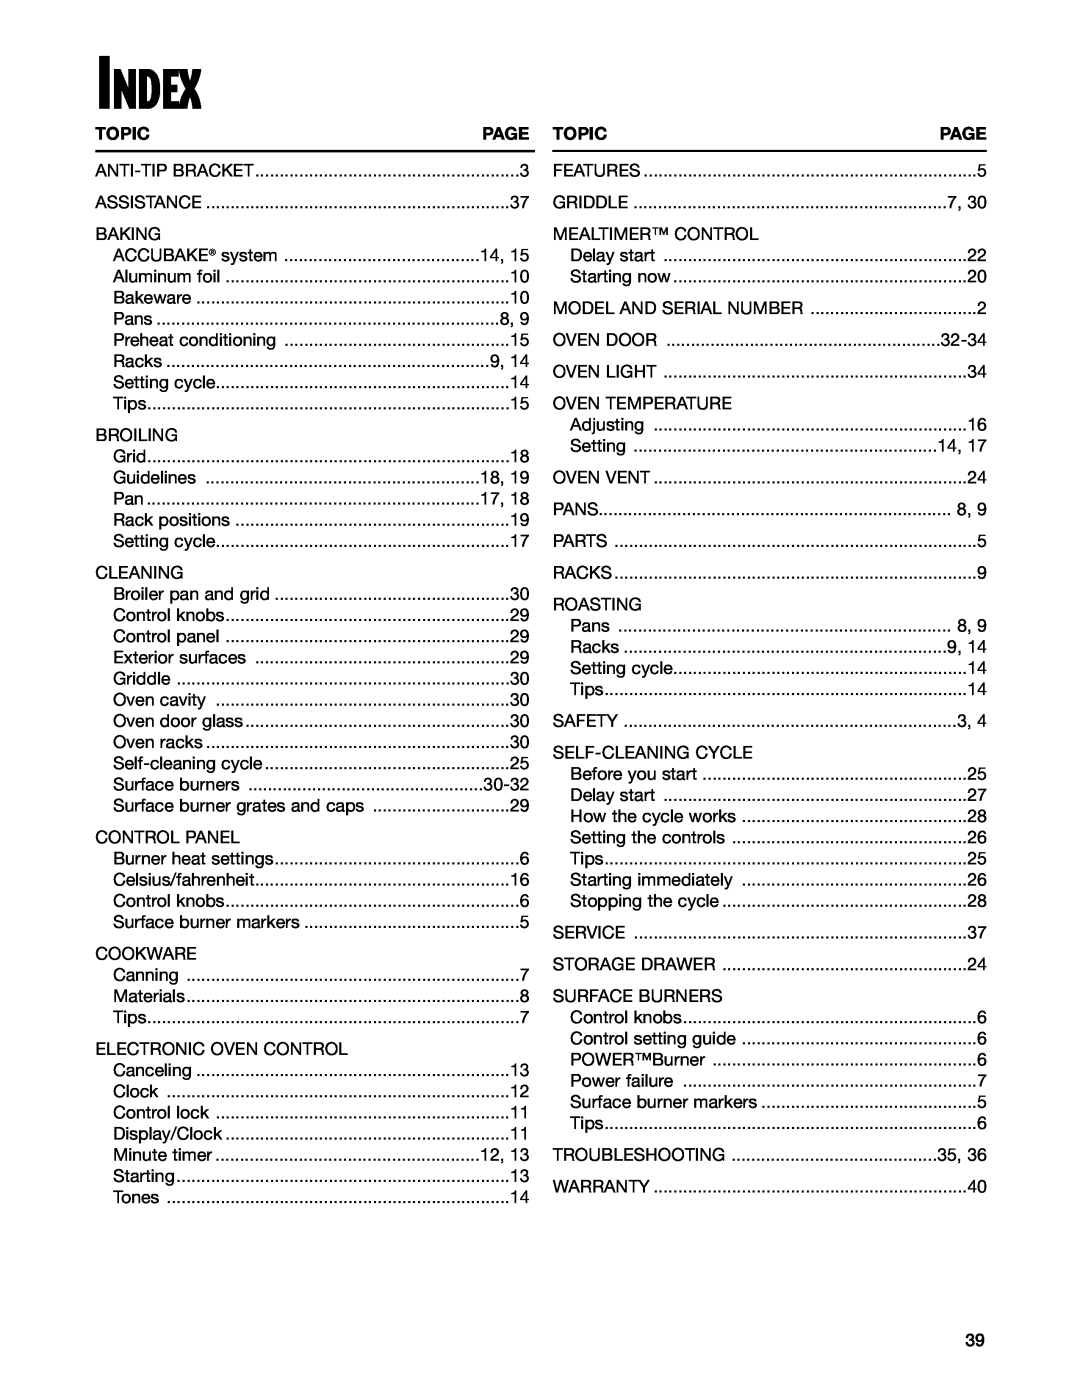 Whirlpool F195LEH warranty Index, Topic, Page 